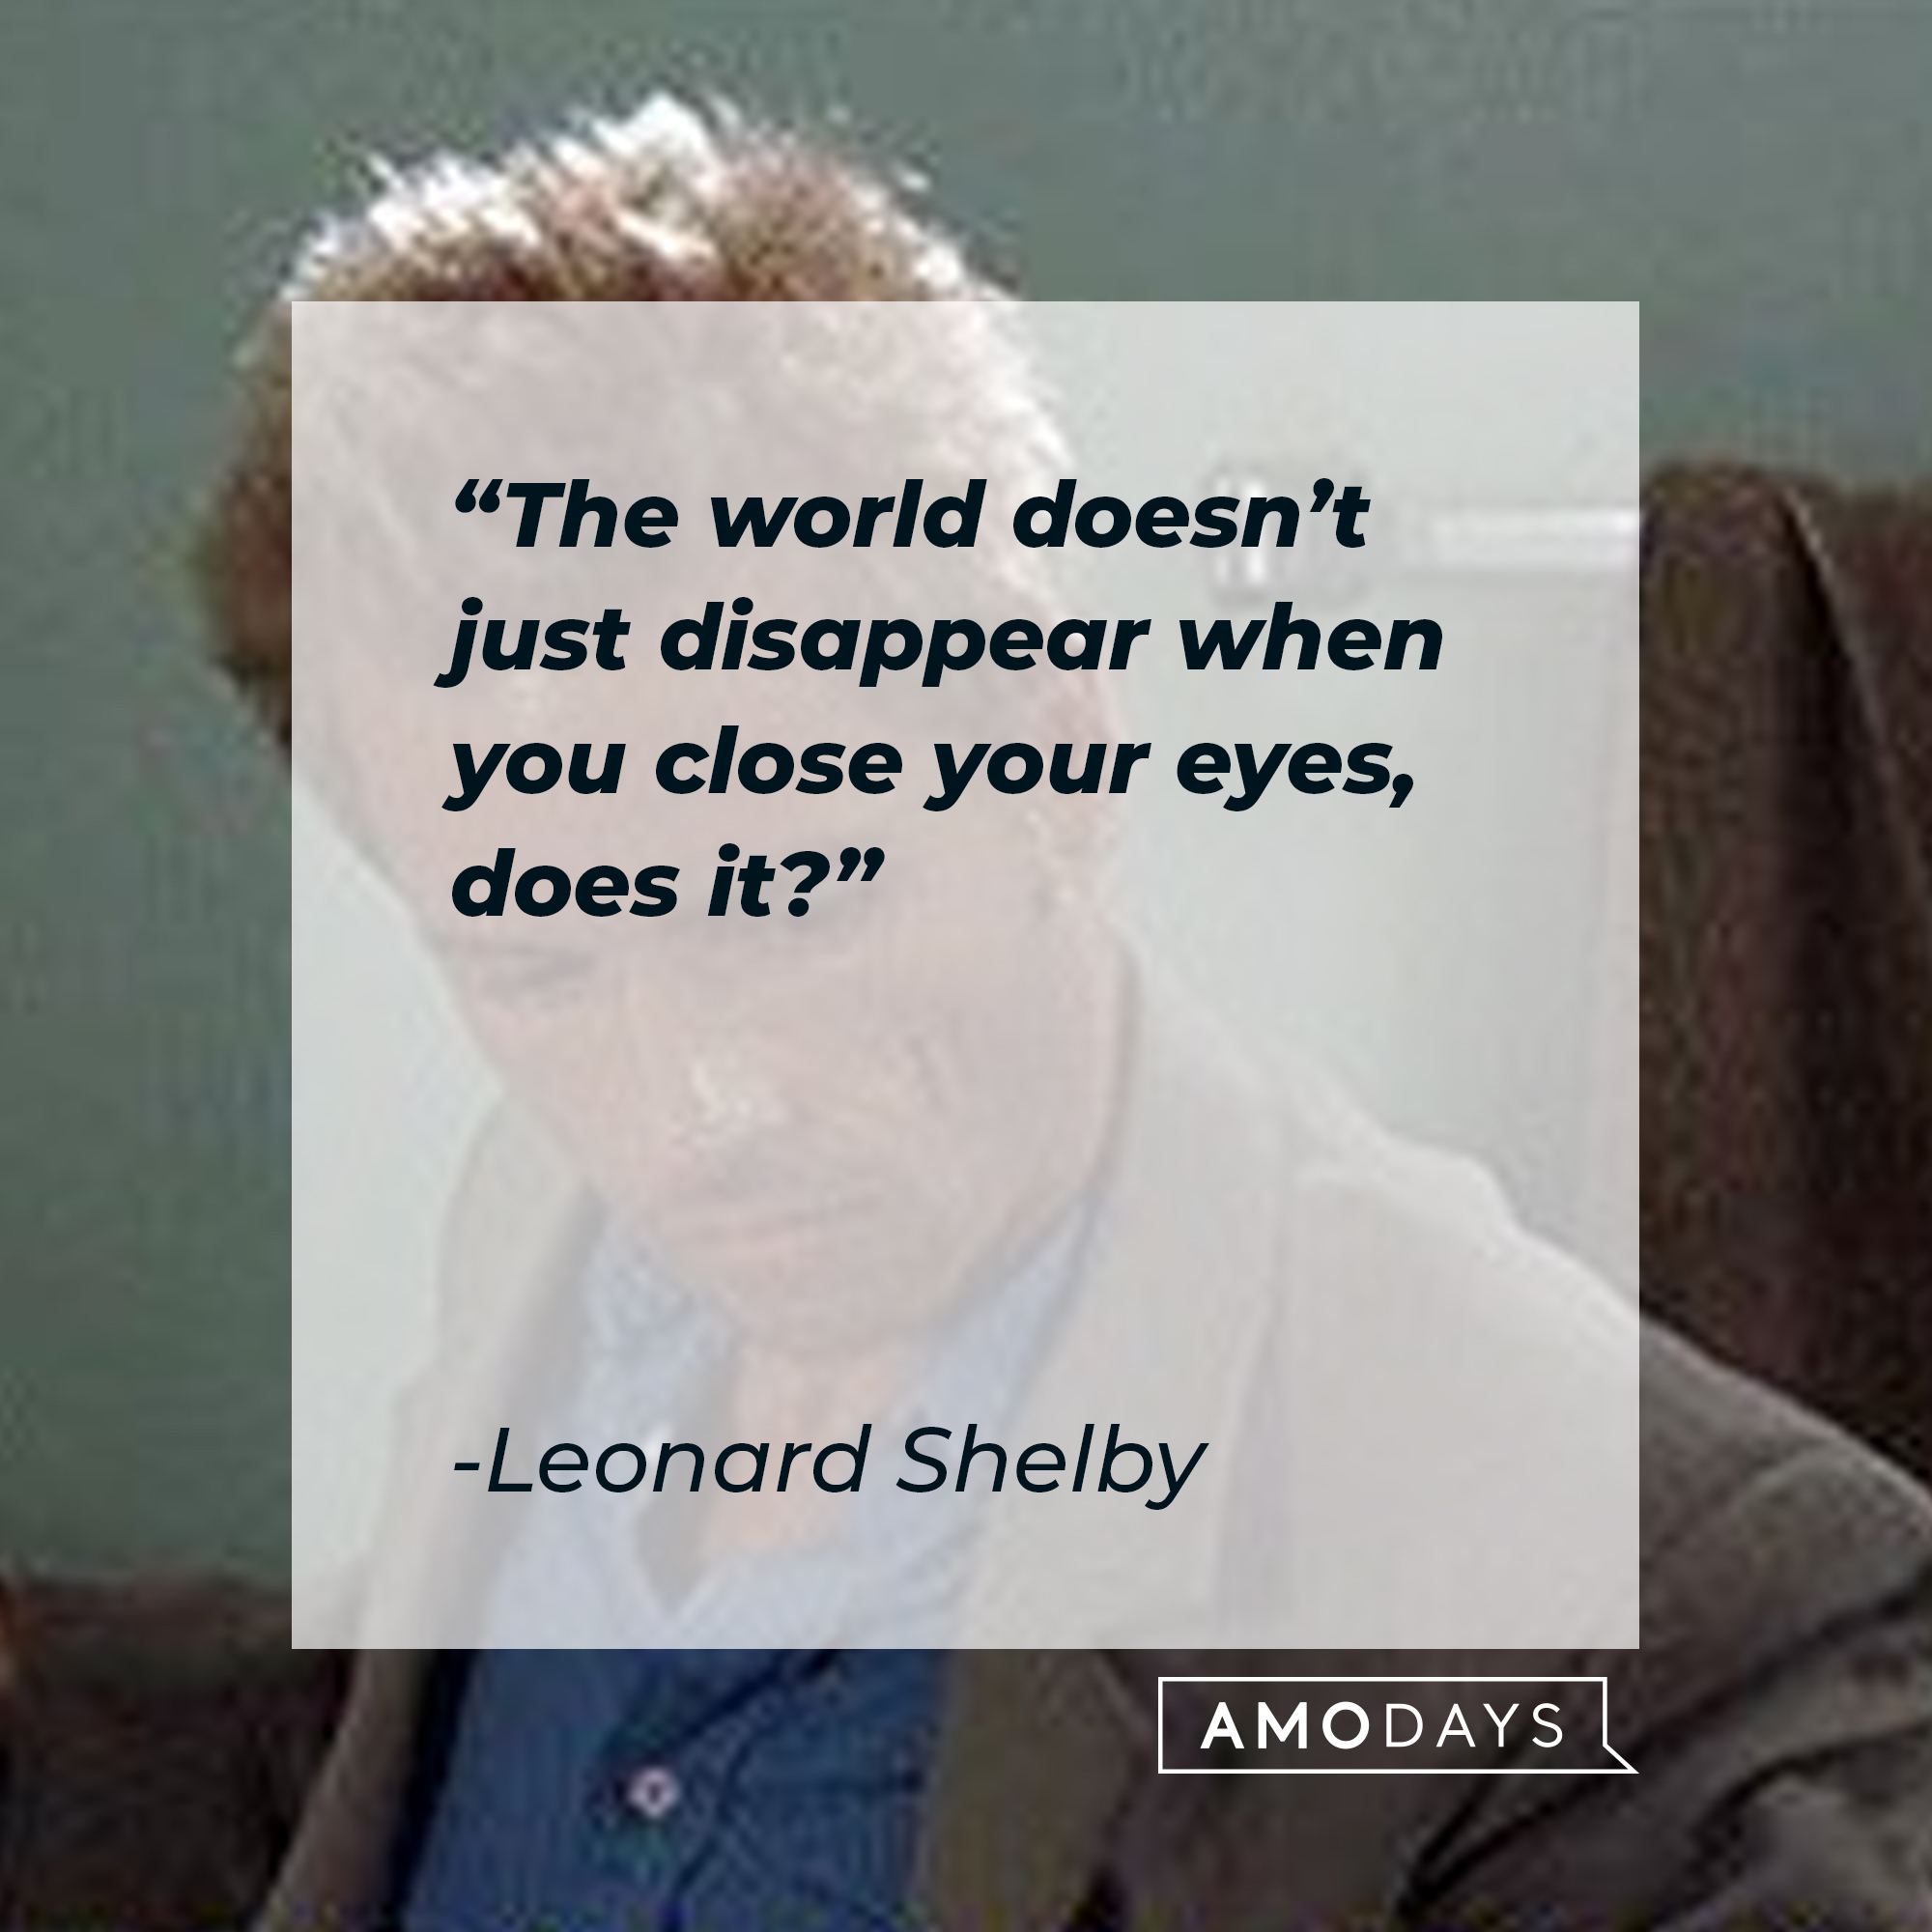 Leonard Shelby's quote: "The world doesn't just disappear when you close your eyes, does it?" | Source: facebook.com/MementoOfficial